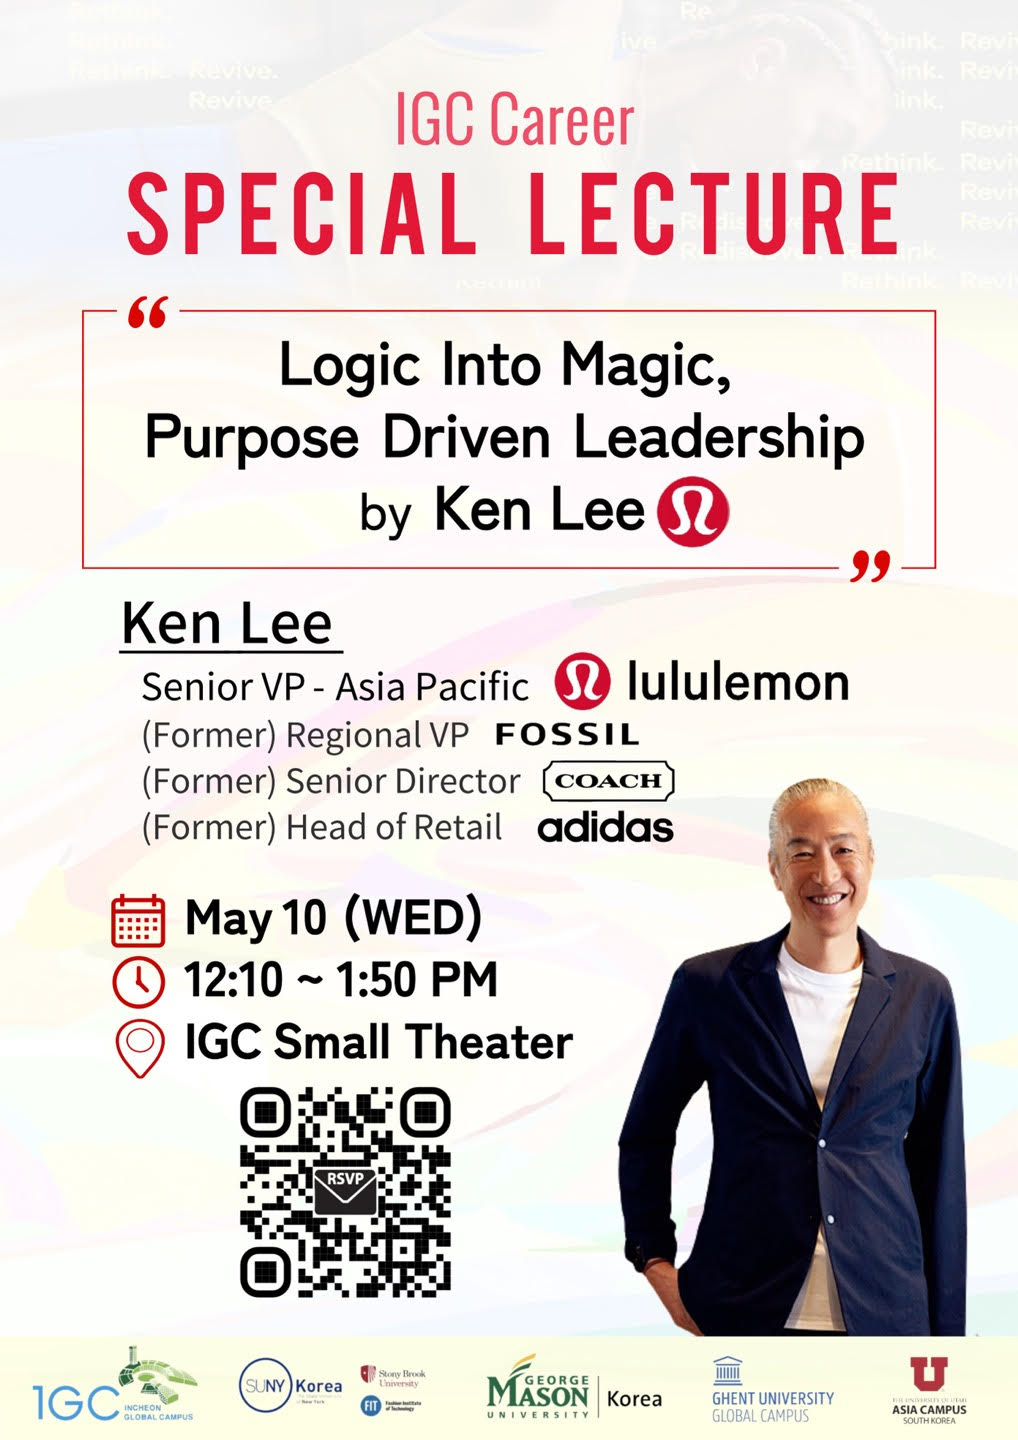 IGC Career SPECIAL LECTURE &ldqup;Logic Into Magic, Purpose Driven Leadership by Ken Lee” Ken Lee Senior VP - Asia Pacific lululemon (Former) Regional VP FOSSIL. (Former) Senior Director COACH (Former) Head of Retail adidas. May 10 (WED) 12:10~1:50PM IGC Small Theater QR(https://me-qr.com/ko/XvOuZ1lb)RSVP / 1GC INCHEON GLOBAL CAMPUS. SUNY Korea. GEORGE MASON UNIVERSITY. GHENT UNIVERSITY GLOBAL CAMPUS. ASIA CAMPUS SOUTH KOREA